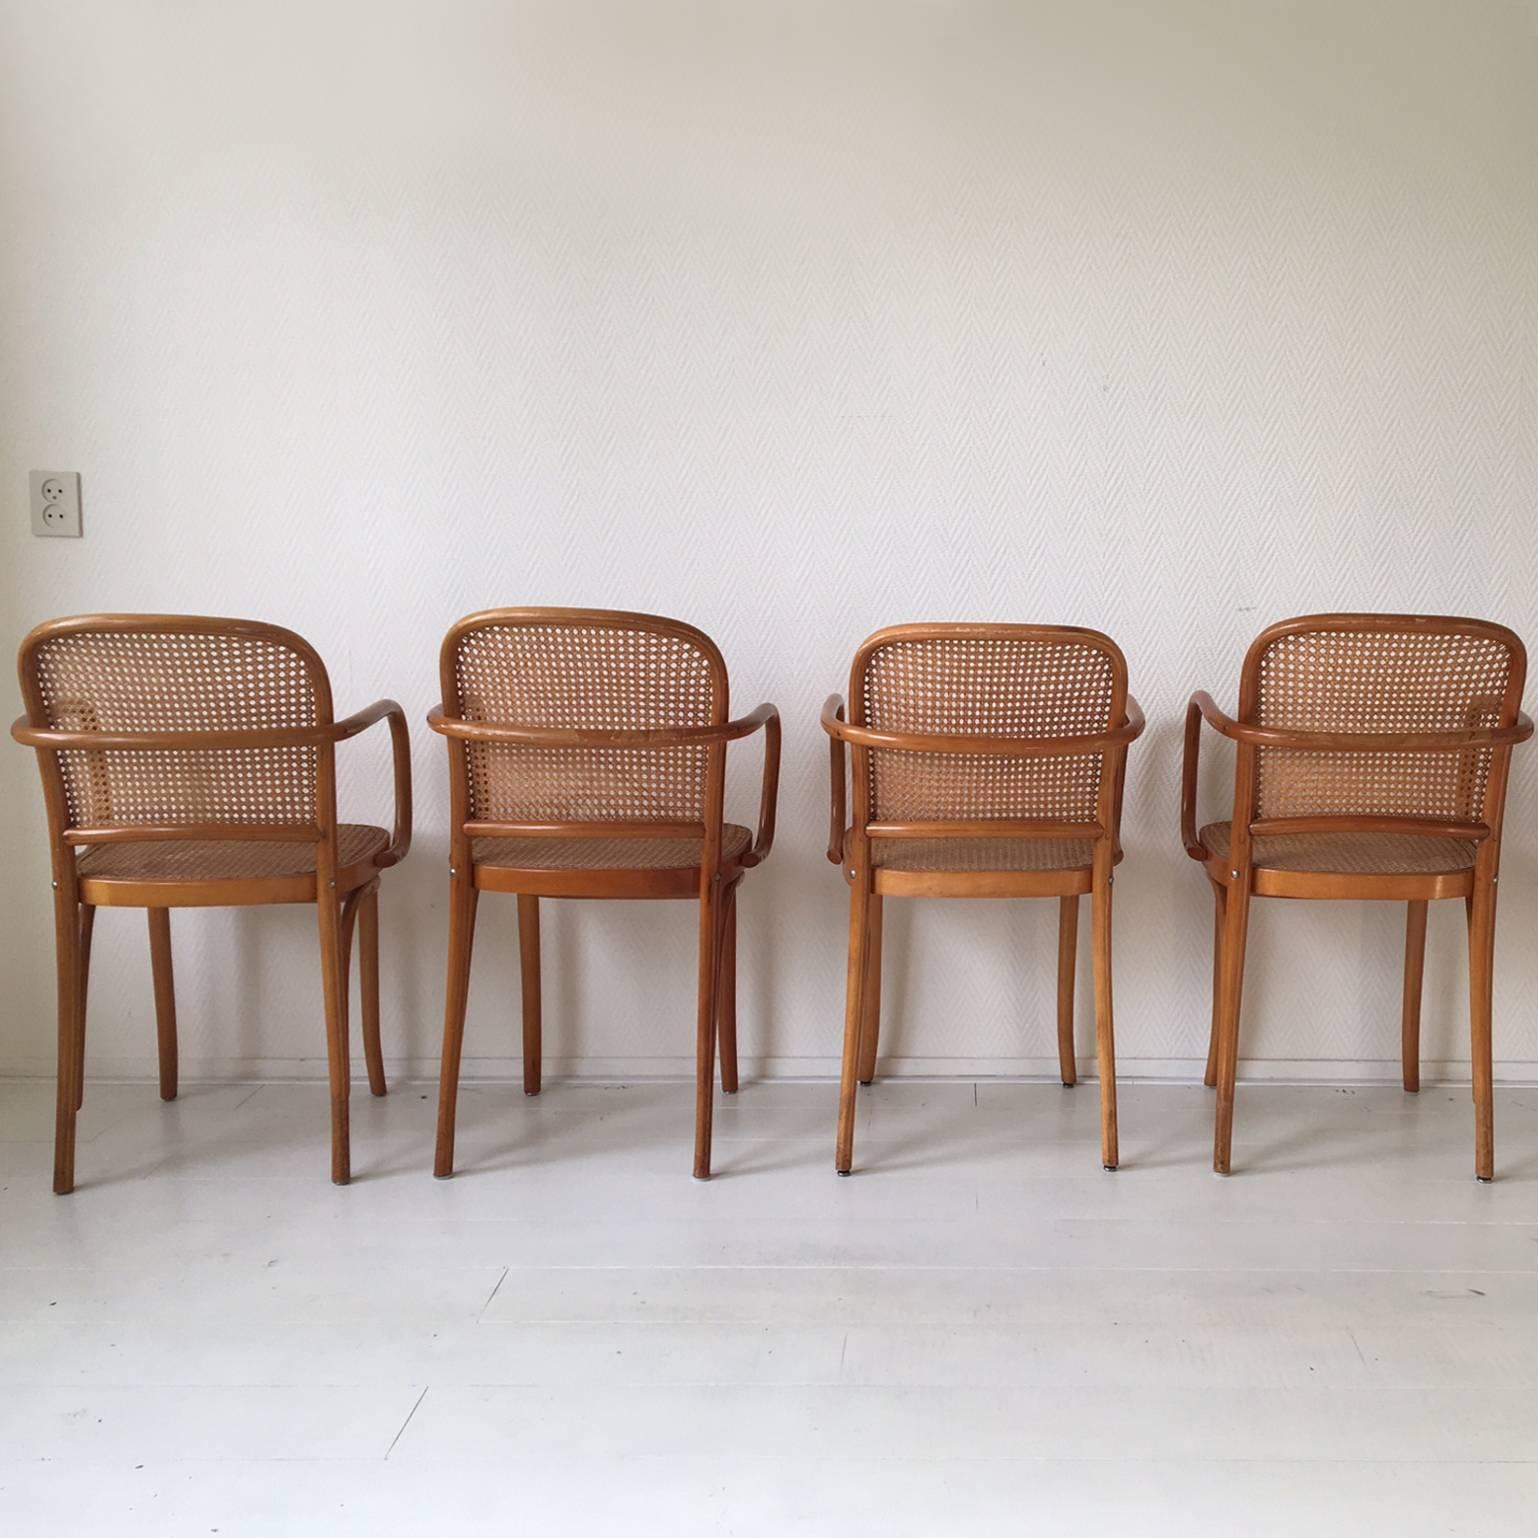 This set of four beautiful chairs was designed by Josef Hoffmann and produced in Romania, circa 1960s. They feature a bentwood frame and a cane seat and back.

They remain in a good vintage condition with minimal signs of age and use.